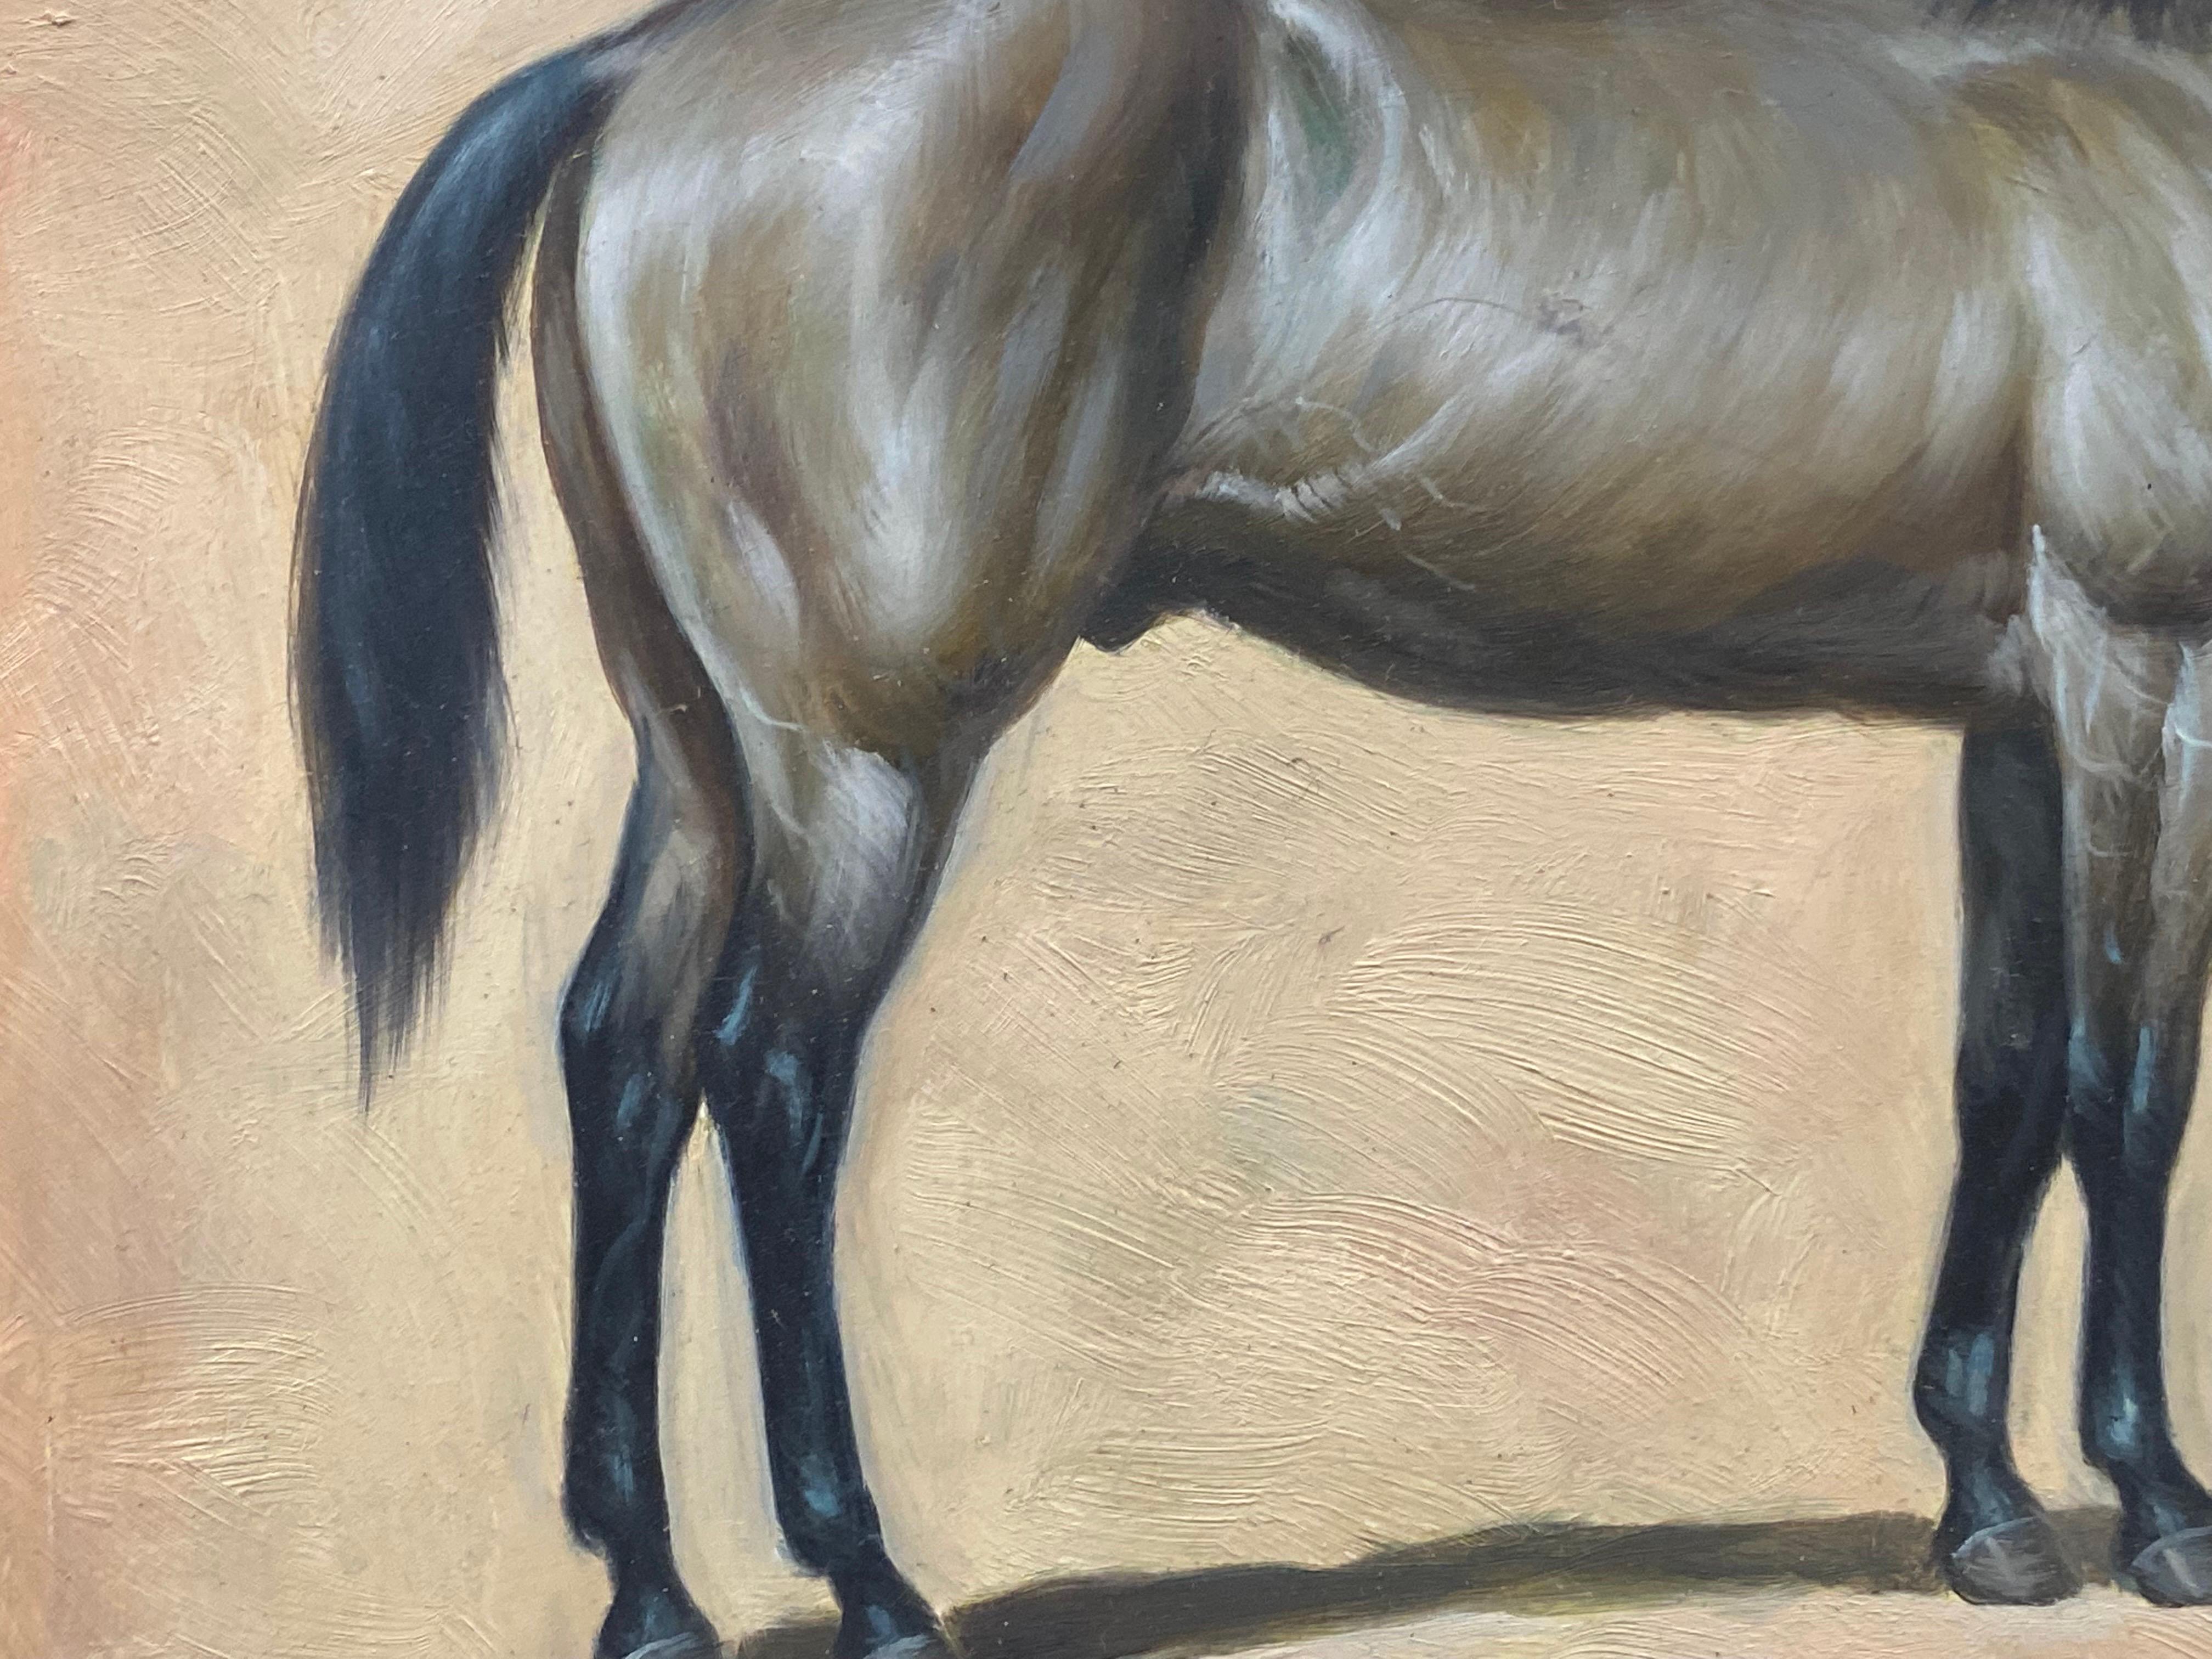 Portrait of a Horse
British School, 20th century
oil painting on panel, unframed
paintings size: 8 x 10 inches
condition: excellent
provenance: from a private collection here in England

A very fine equestrian portrait of this horse. Painted with